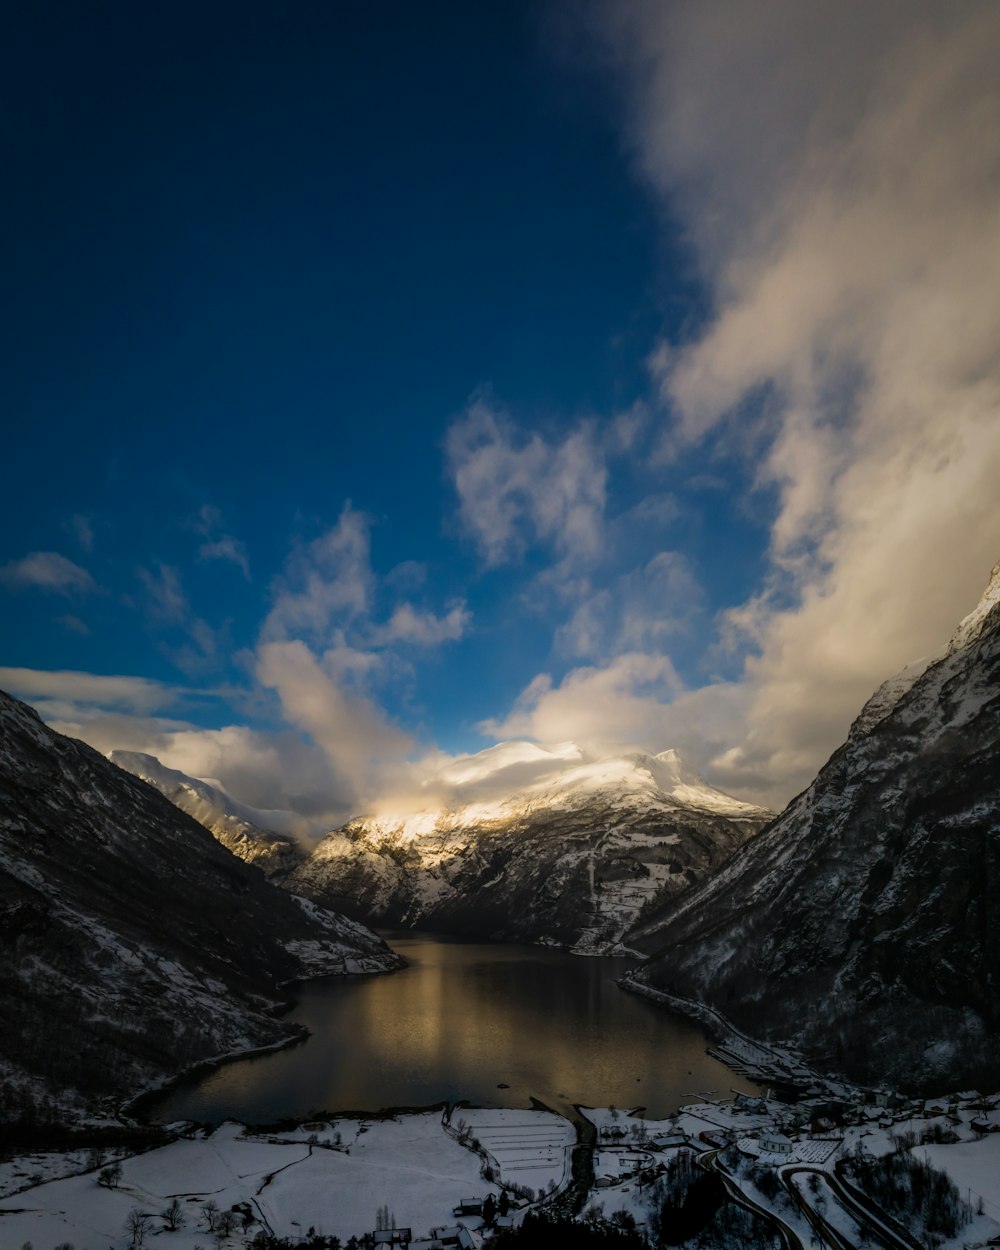 a lake surrounded by snow covered mountains under a cloudy sky